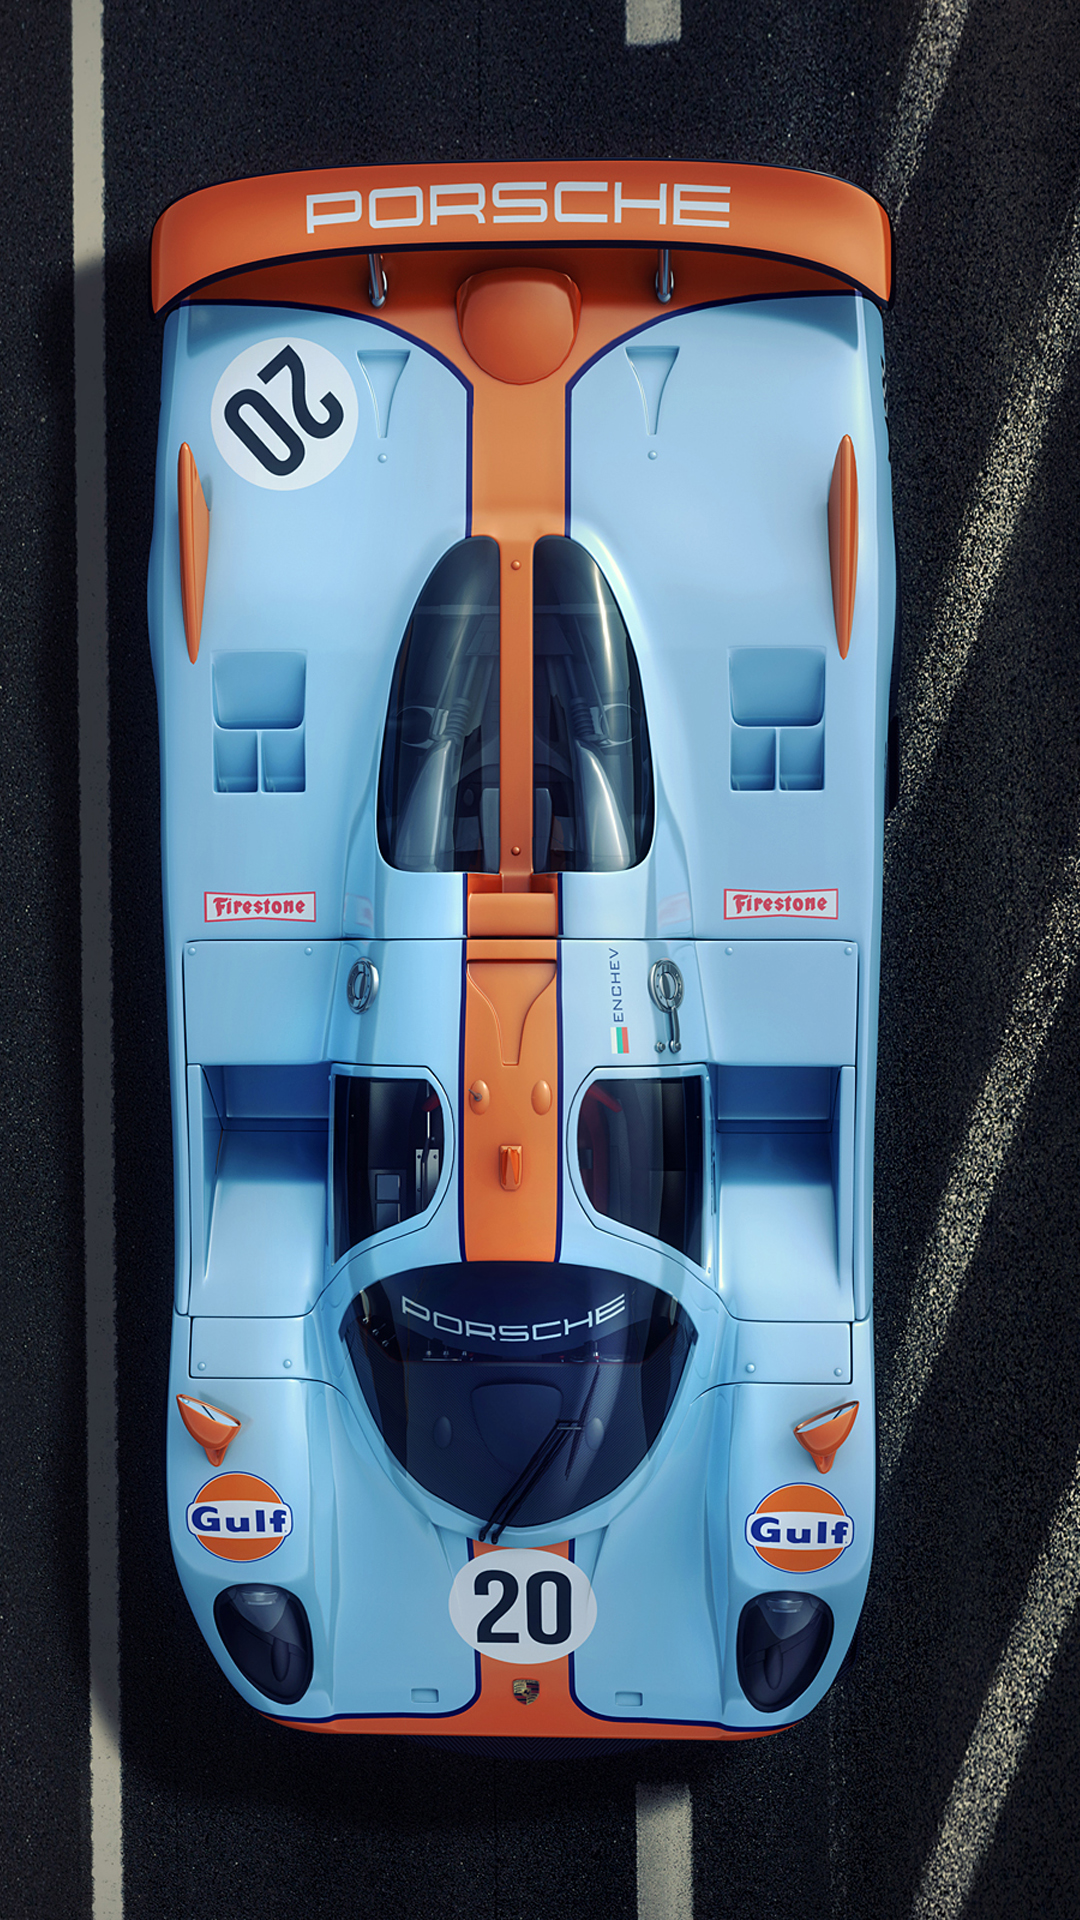 Racing background wallpaper for phone